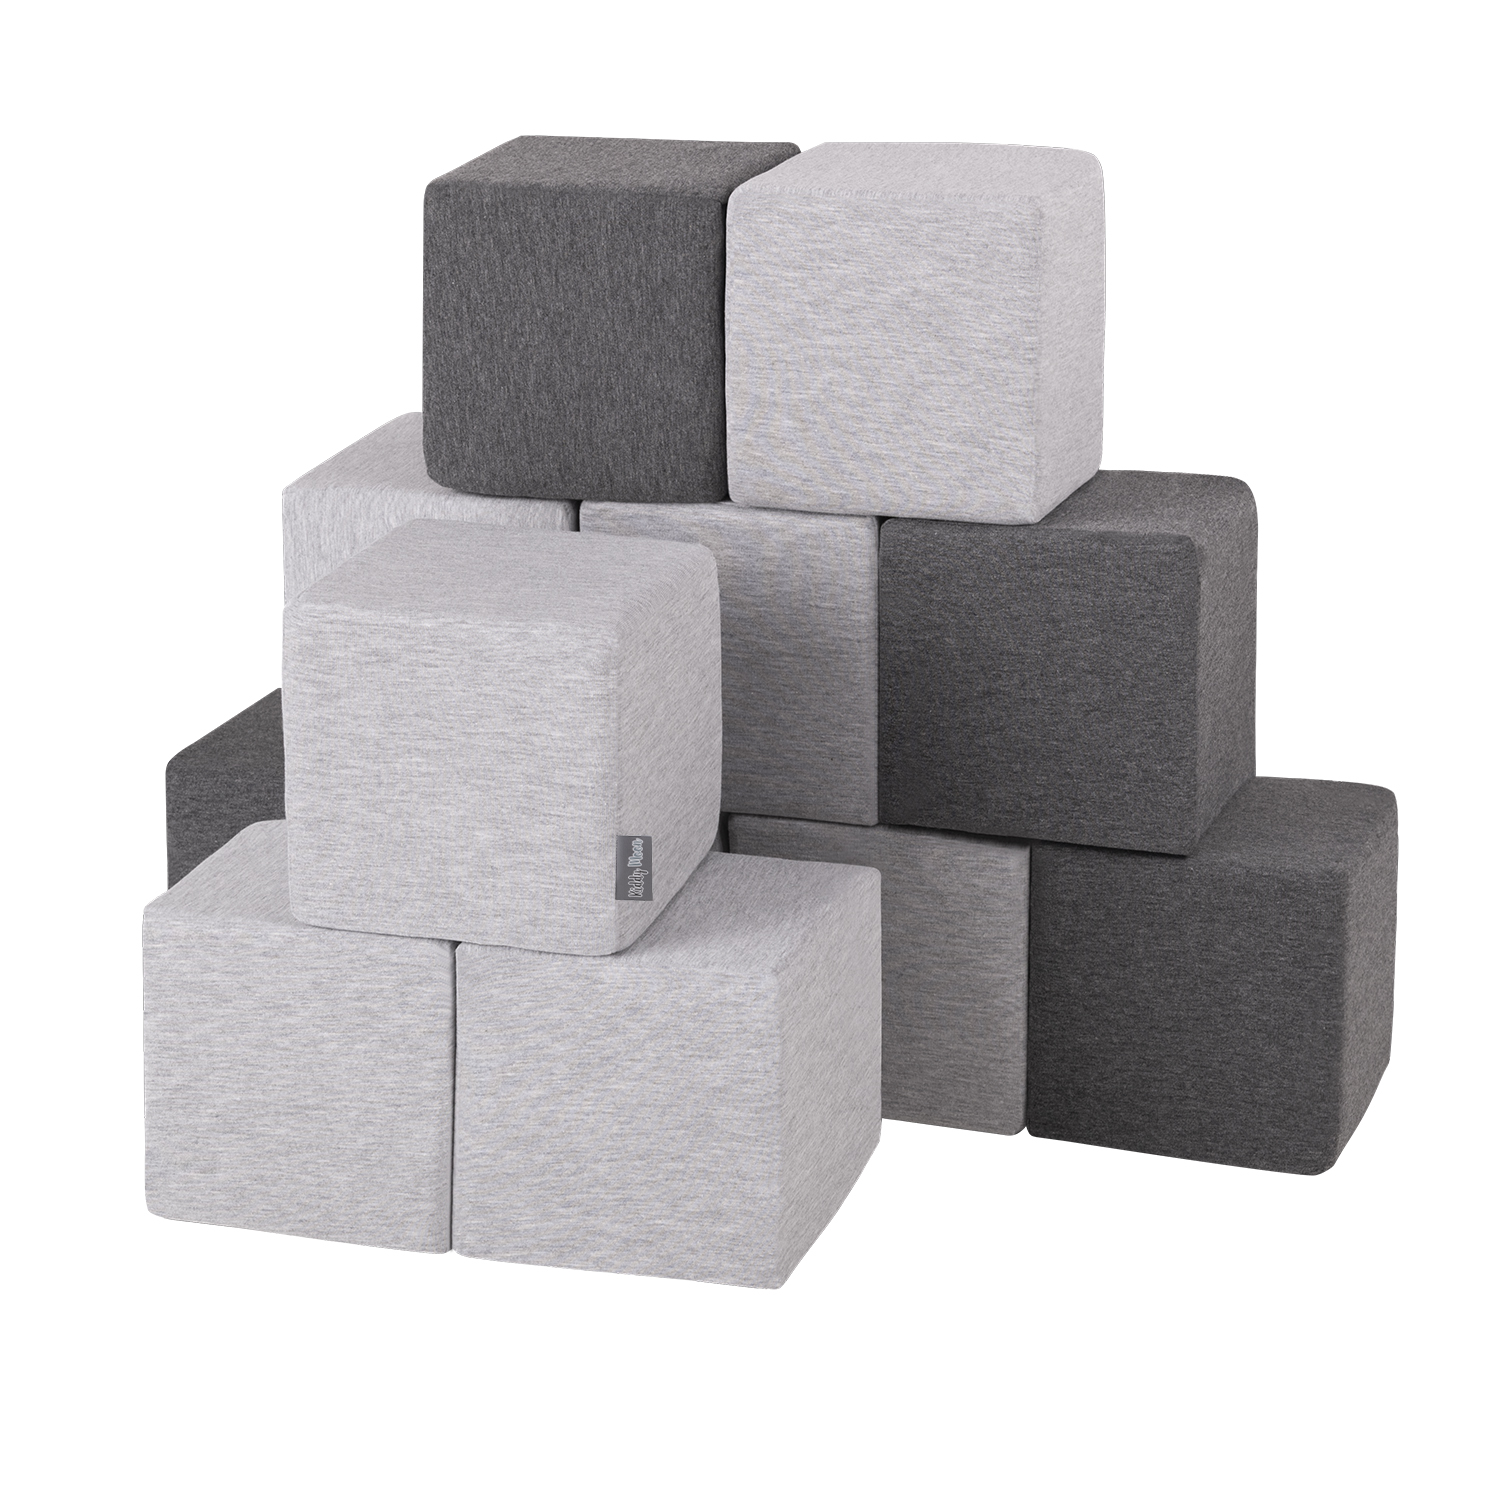 KiddyMoon Soft Foam Cubes Building Blocks 14cm for Children Multifunctional  Foam Construction Montessori Toy for Babies, Certified Made in The EU,  Cubes: Light Grey-Mint